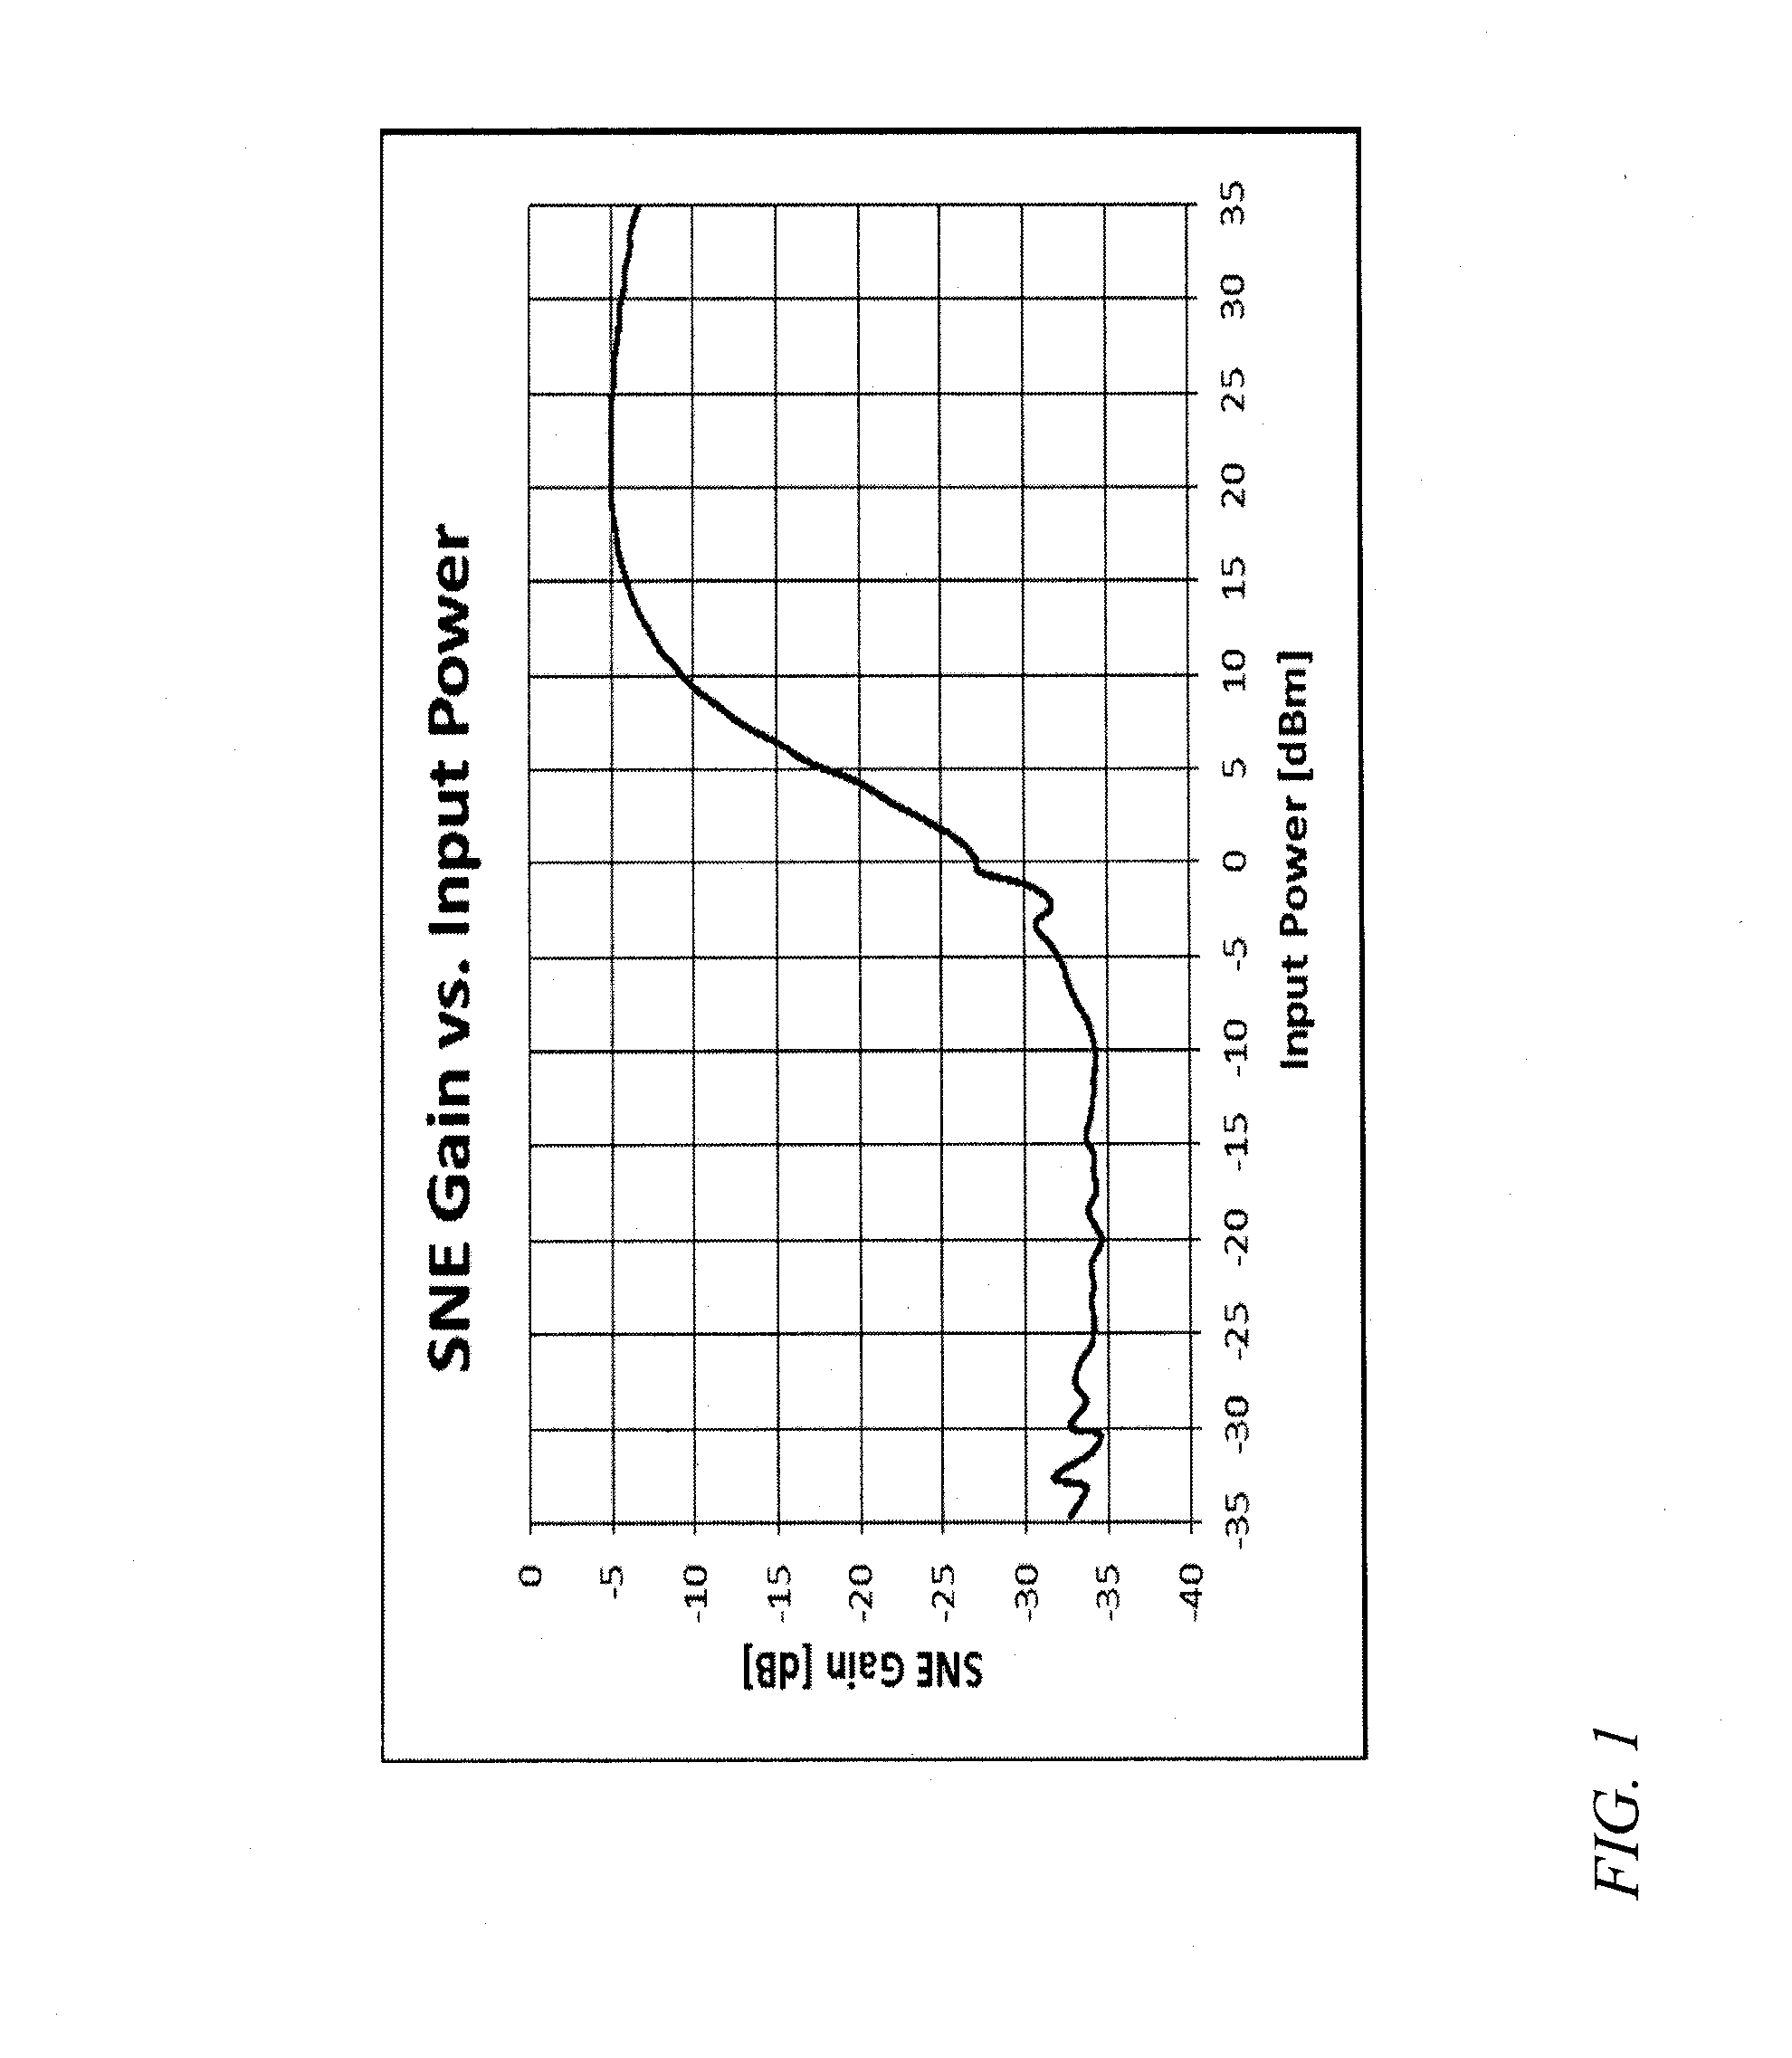 Frequency conversion system with improved spurious response and frequency agility